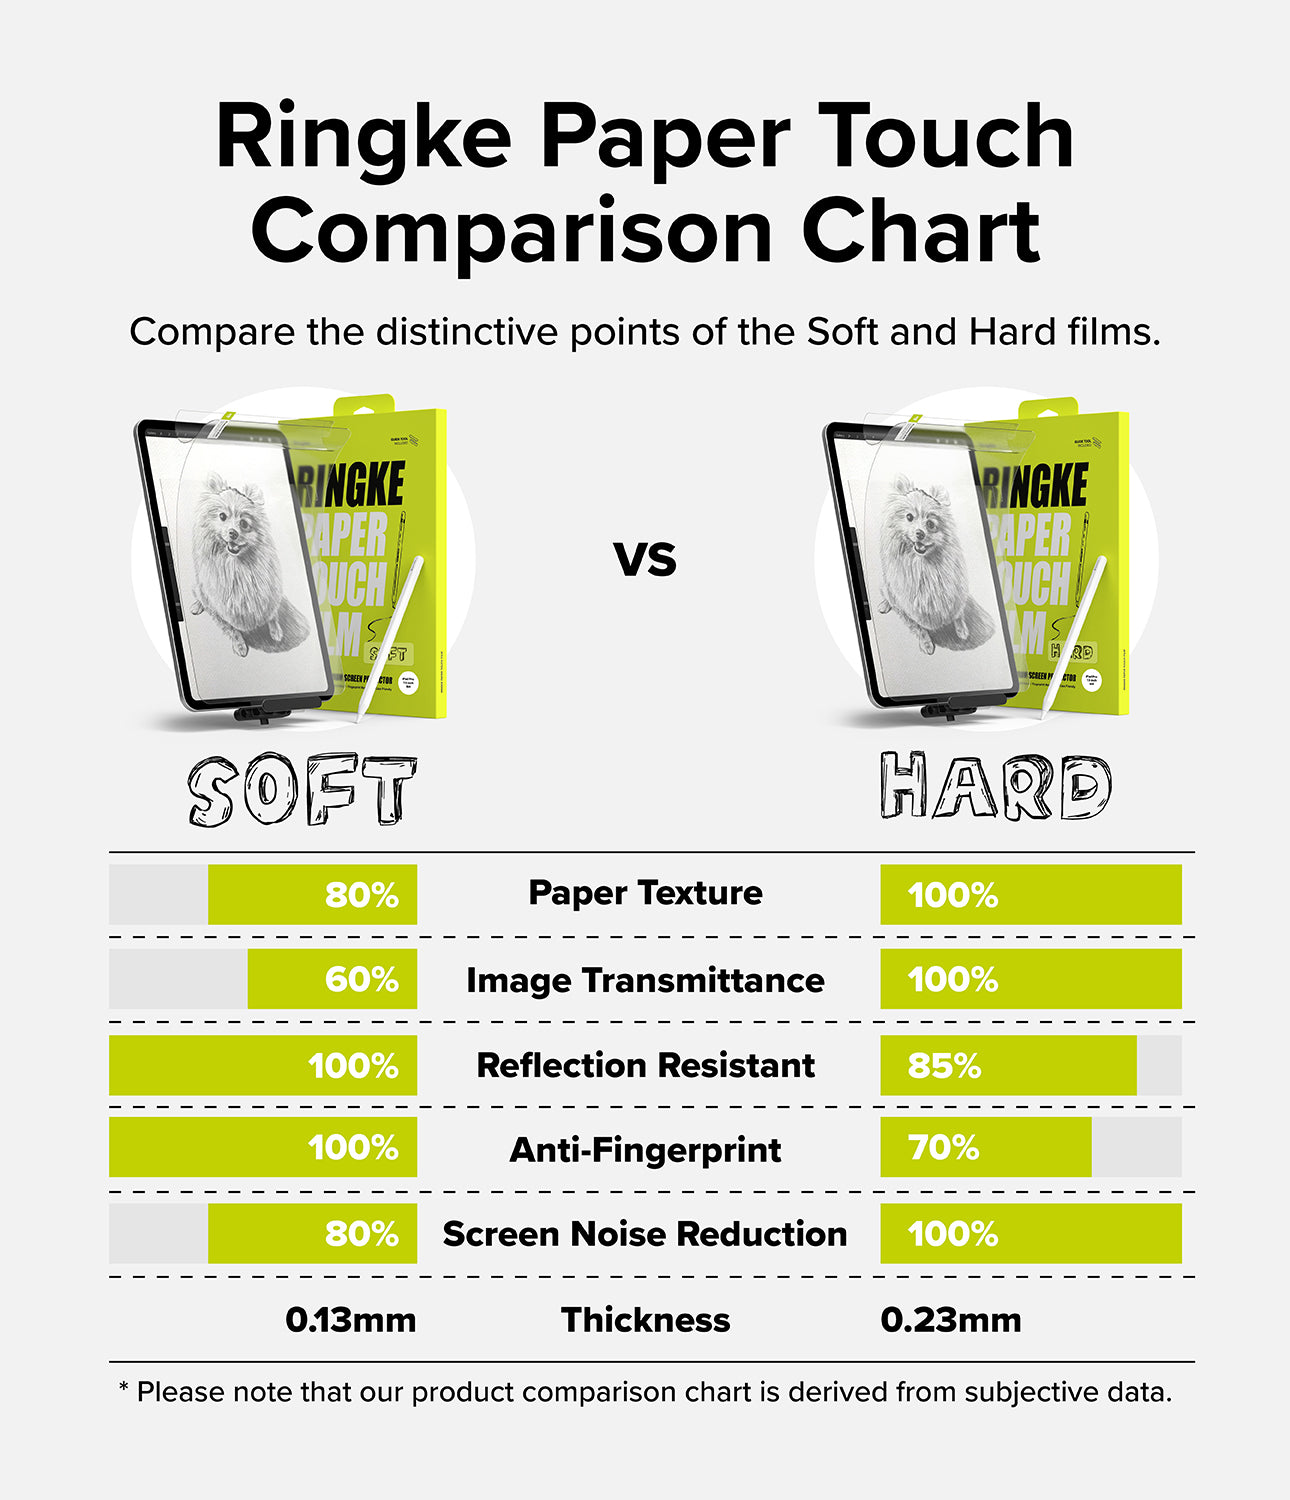 iPad Pro 13" (M4) Screen Protector | Paper Touch Film - Soft - Ringke Paper Touch Comparison Chart. Compare the distinctive points of the Soft and Hard films.